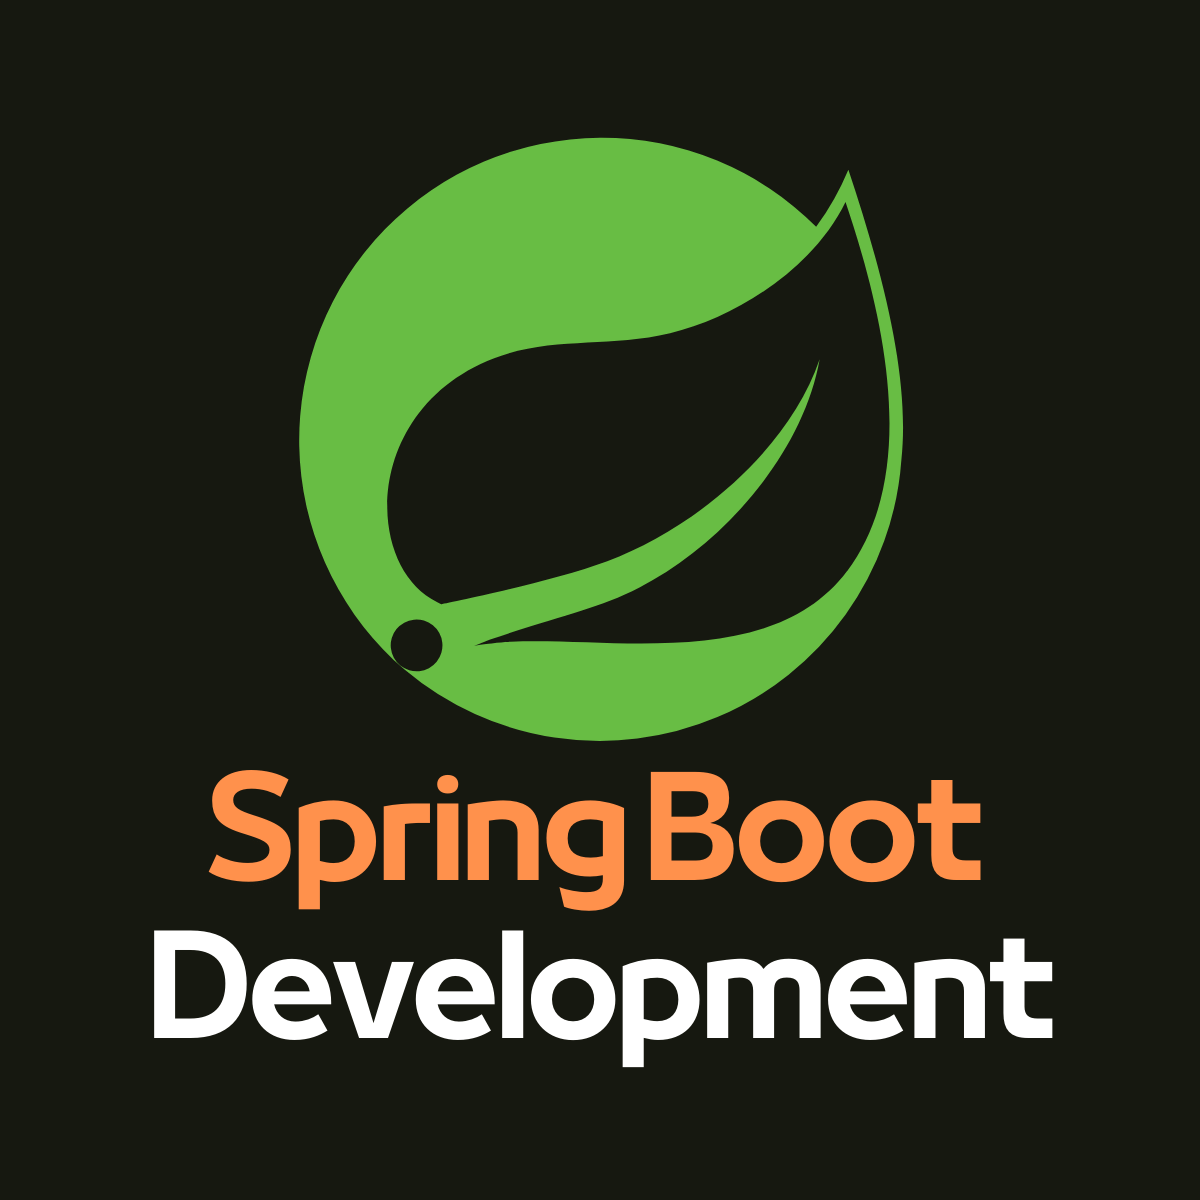 Spring Boot Development Company in India